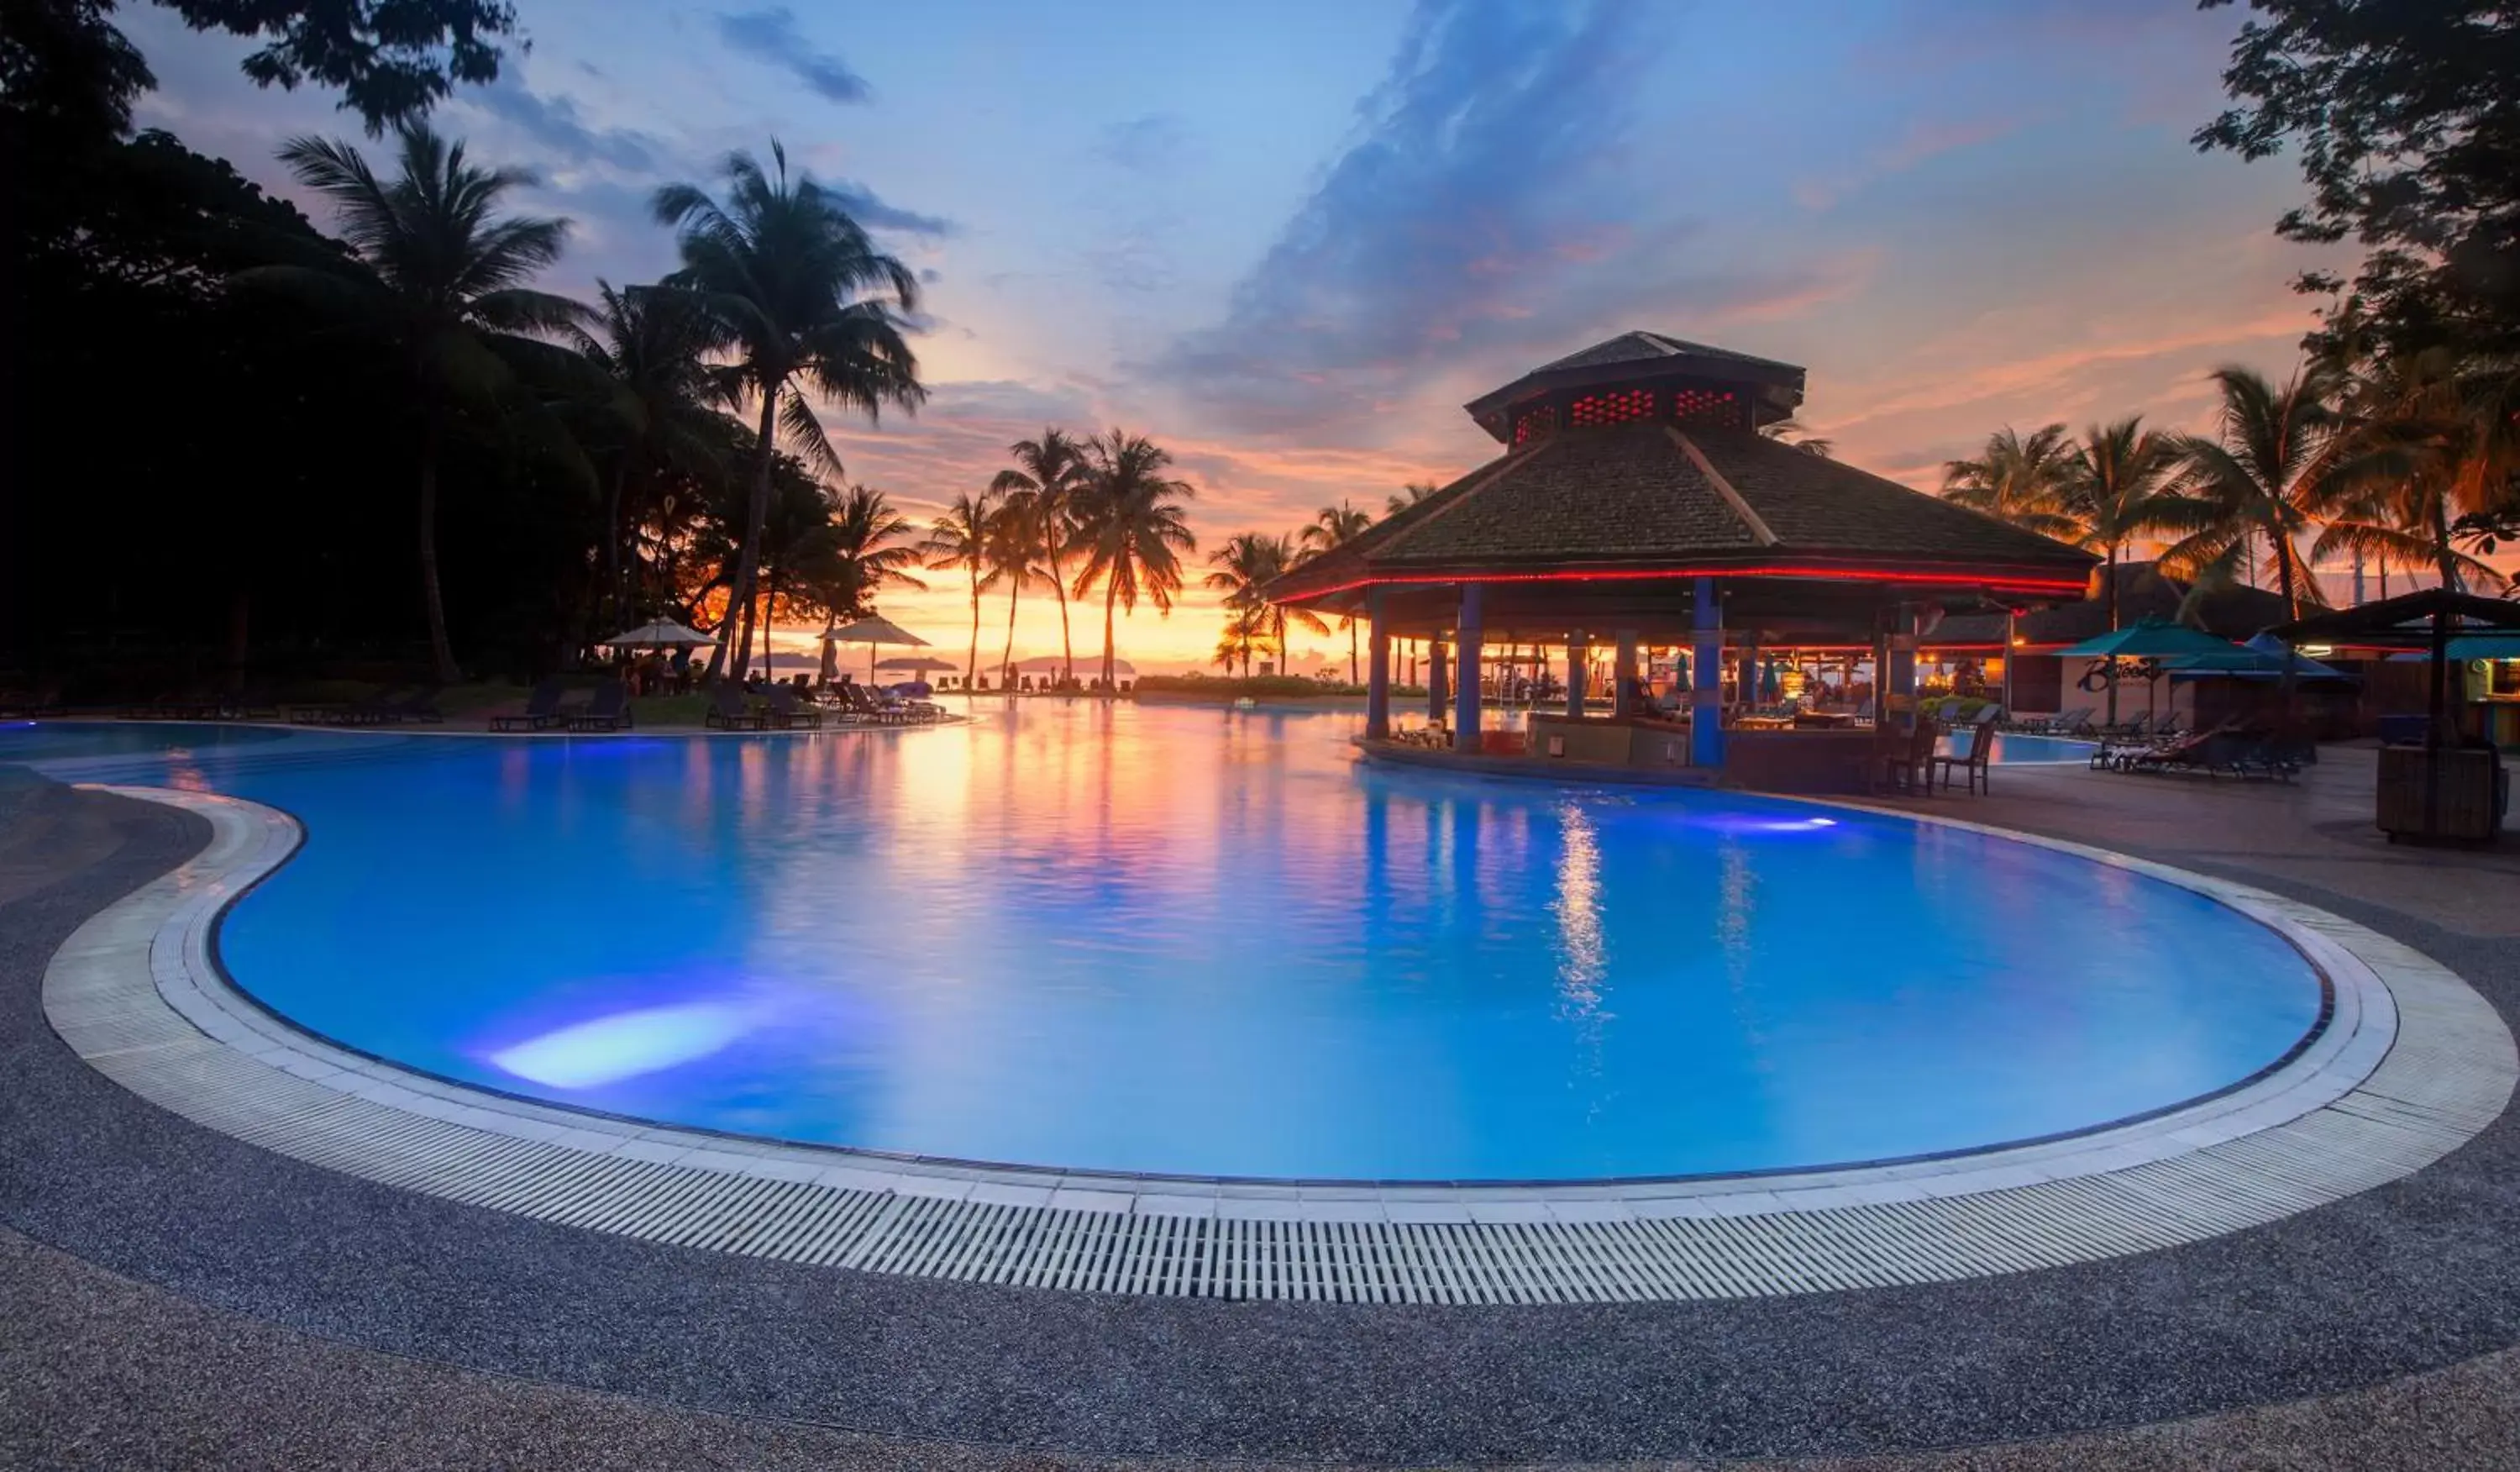 Property building, Sunrise/Sunset in The Pacific Sutera